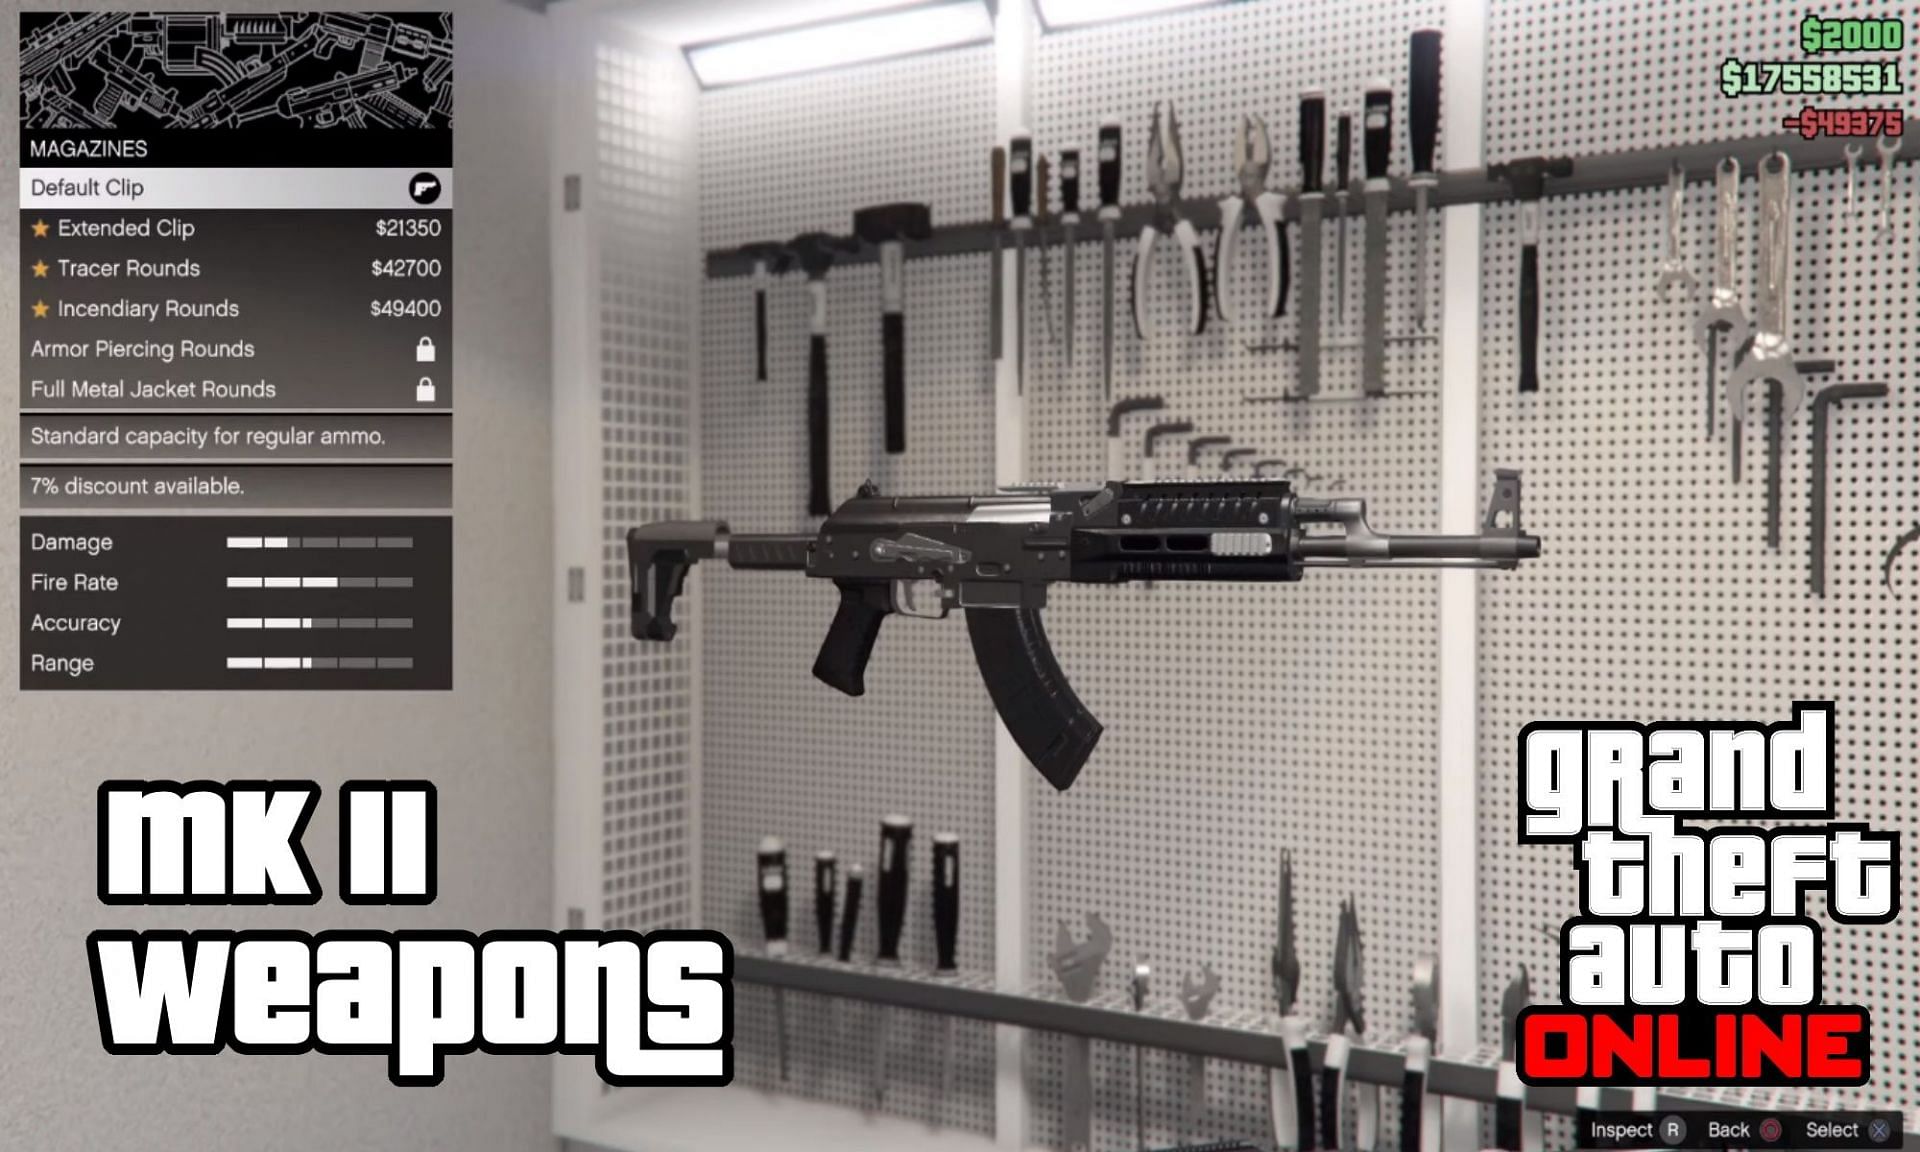 Here is a look at various clips and rounds for Mk II weapons (Image via Sportskeeda)